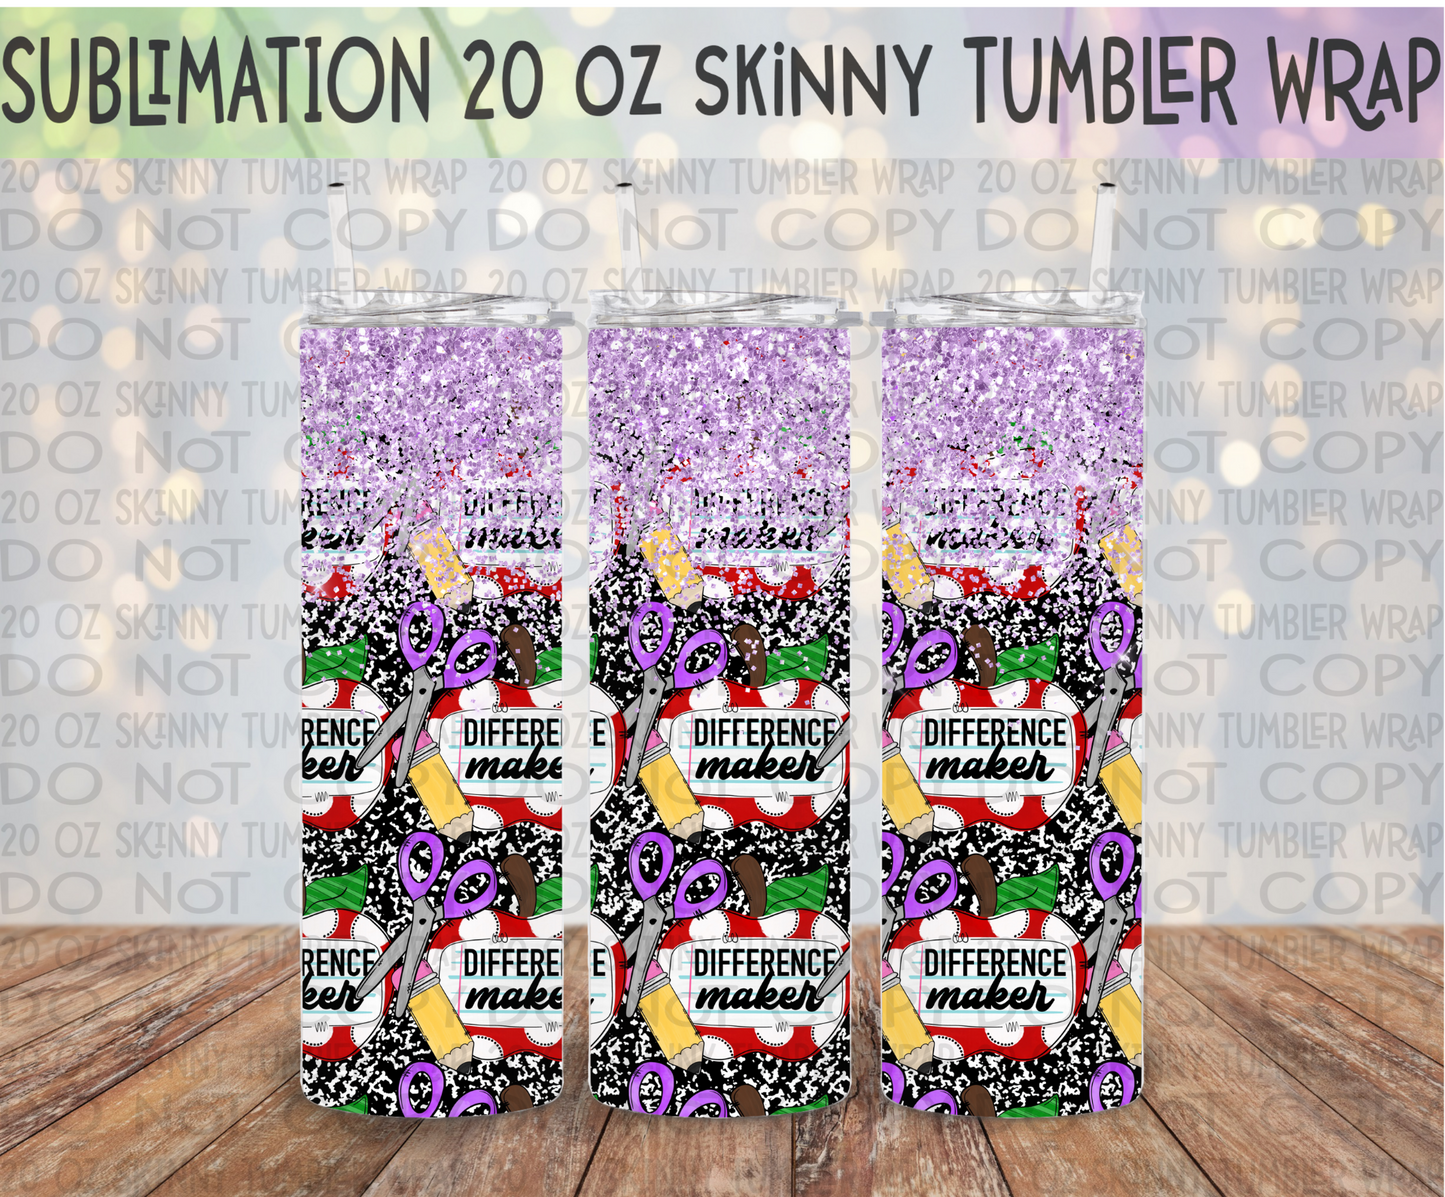 Difference Maker 20 Oz Skinny Tumbler Wrap - Sublimation Transfer - RTS